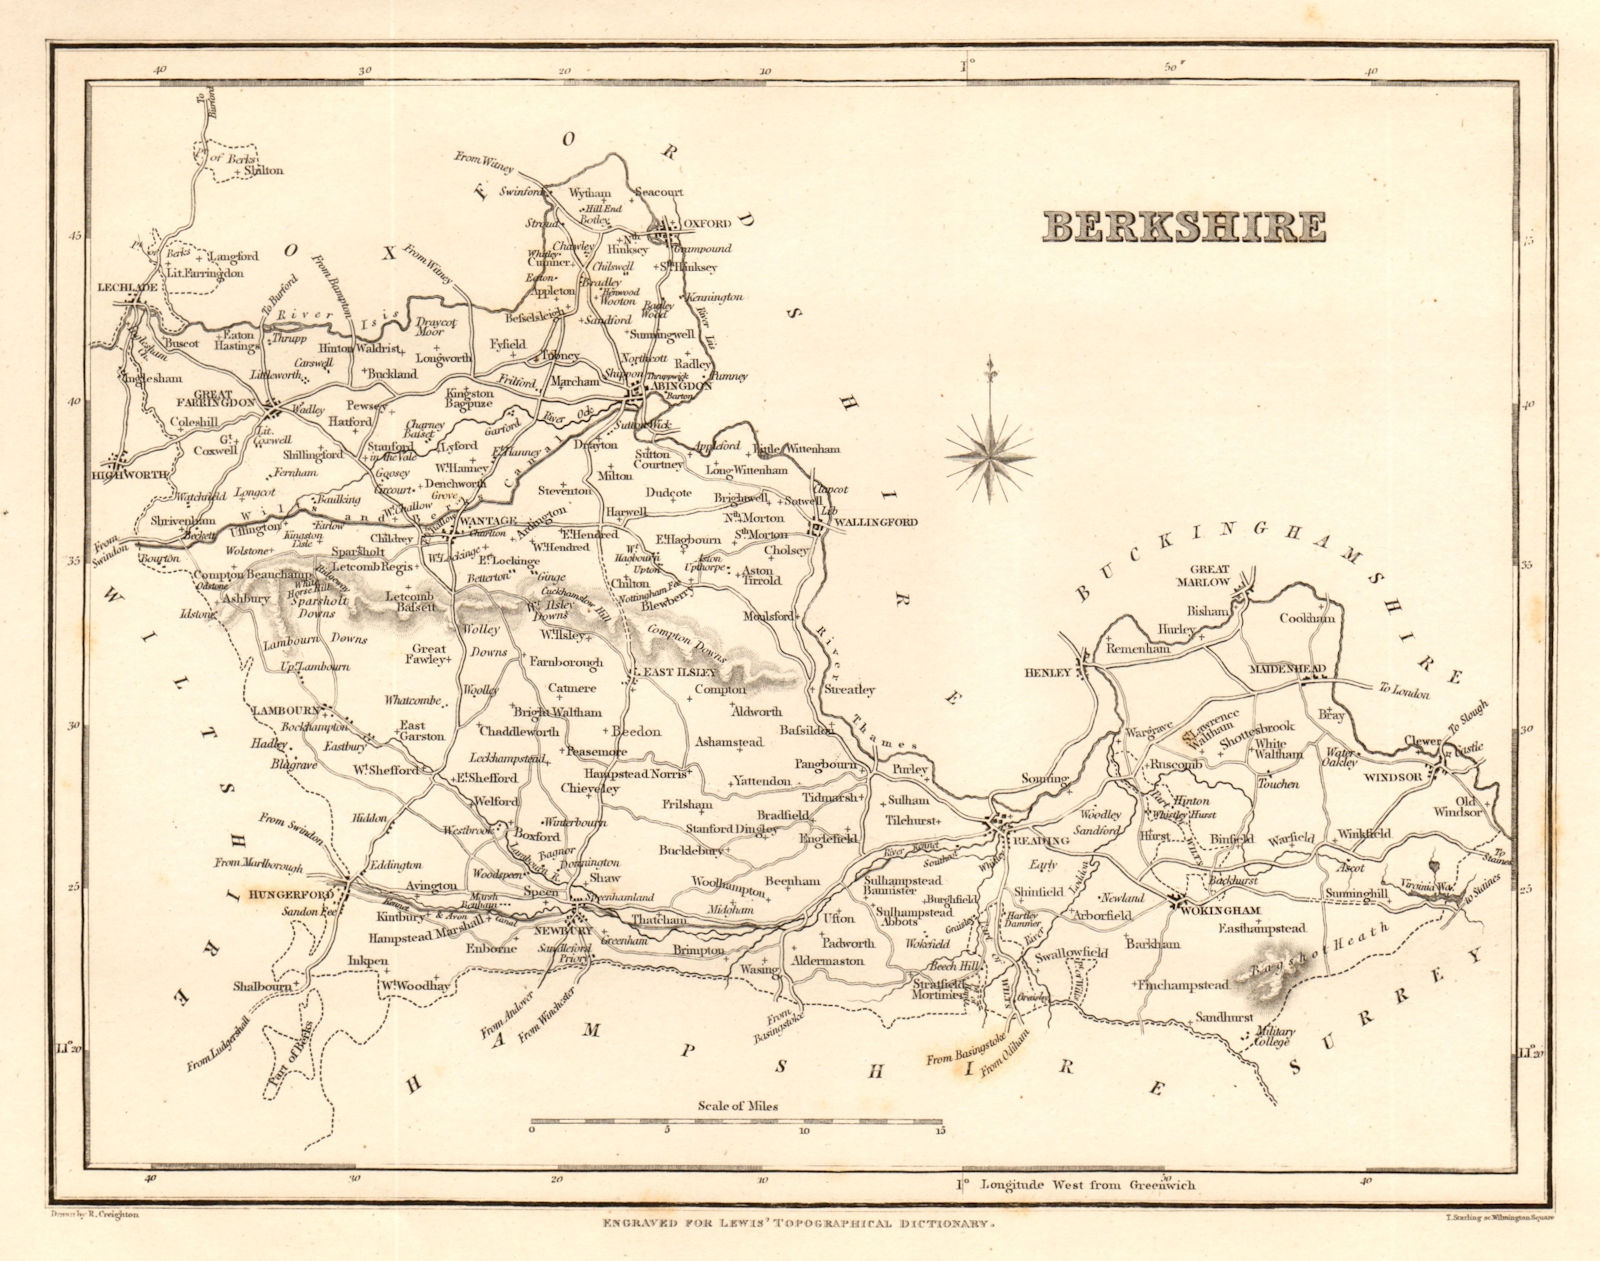 Antique county map of BERKSHIRE by Starling & Creighton for Lewis c1840